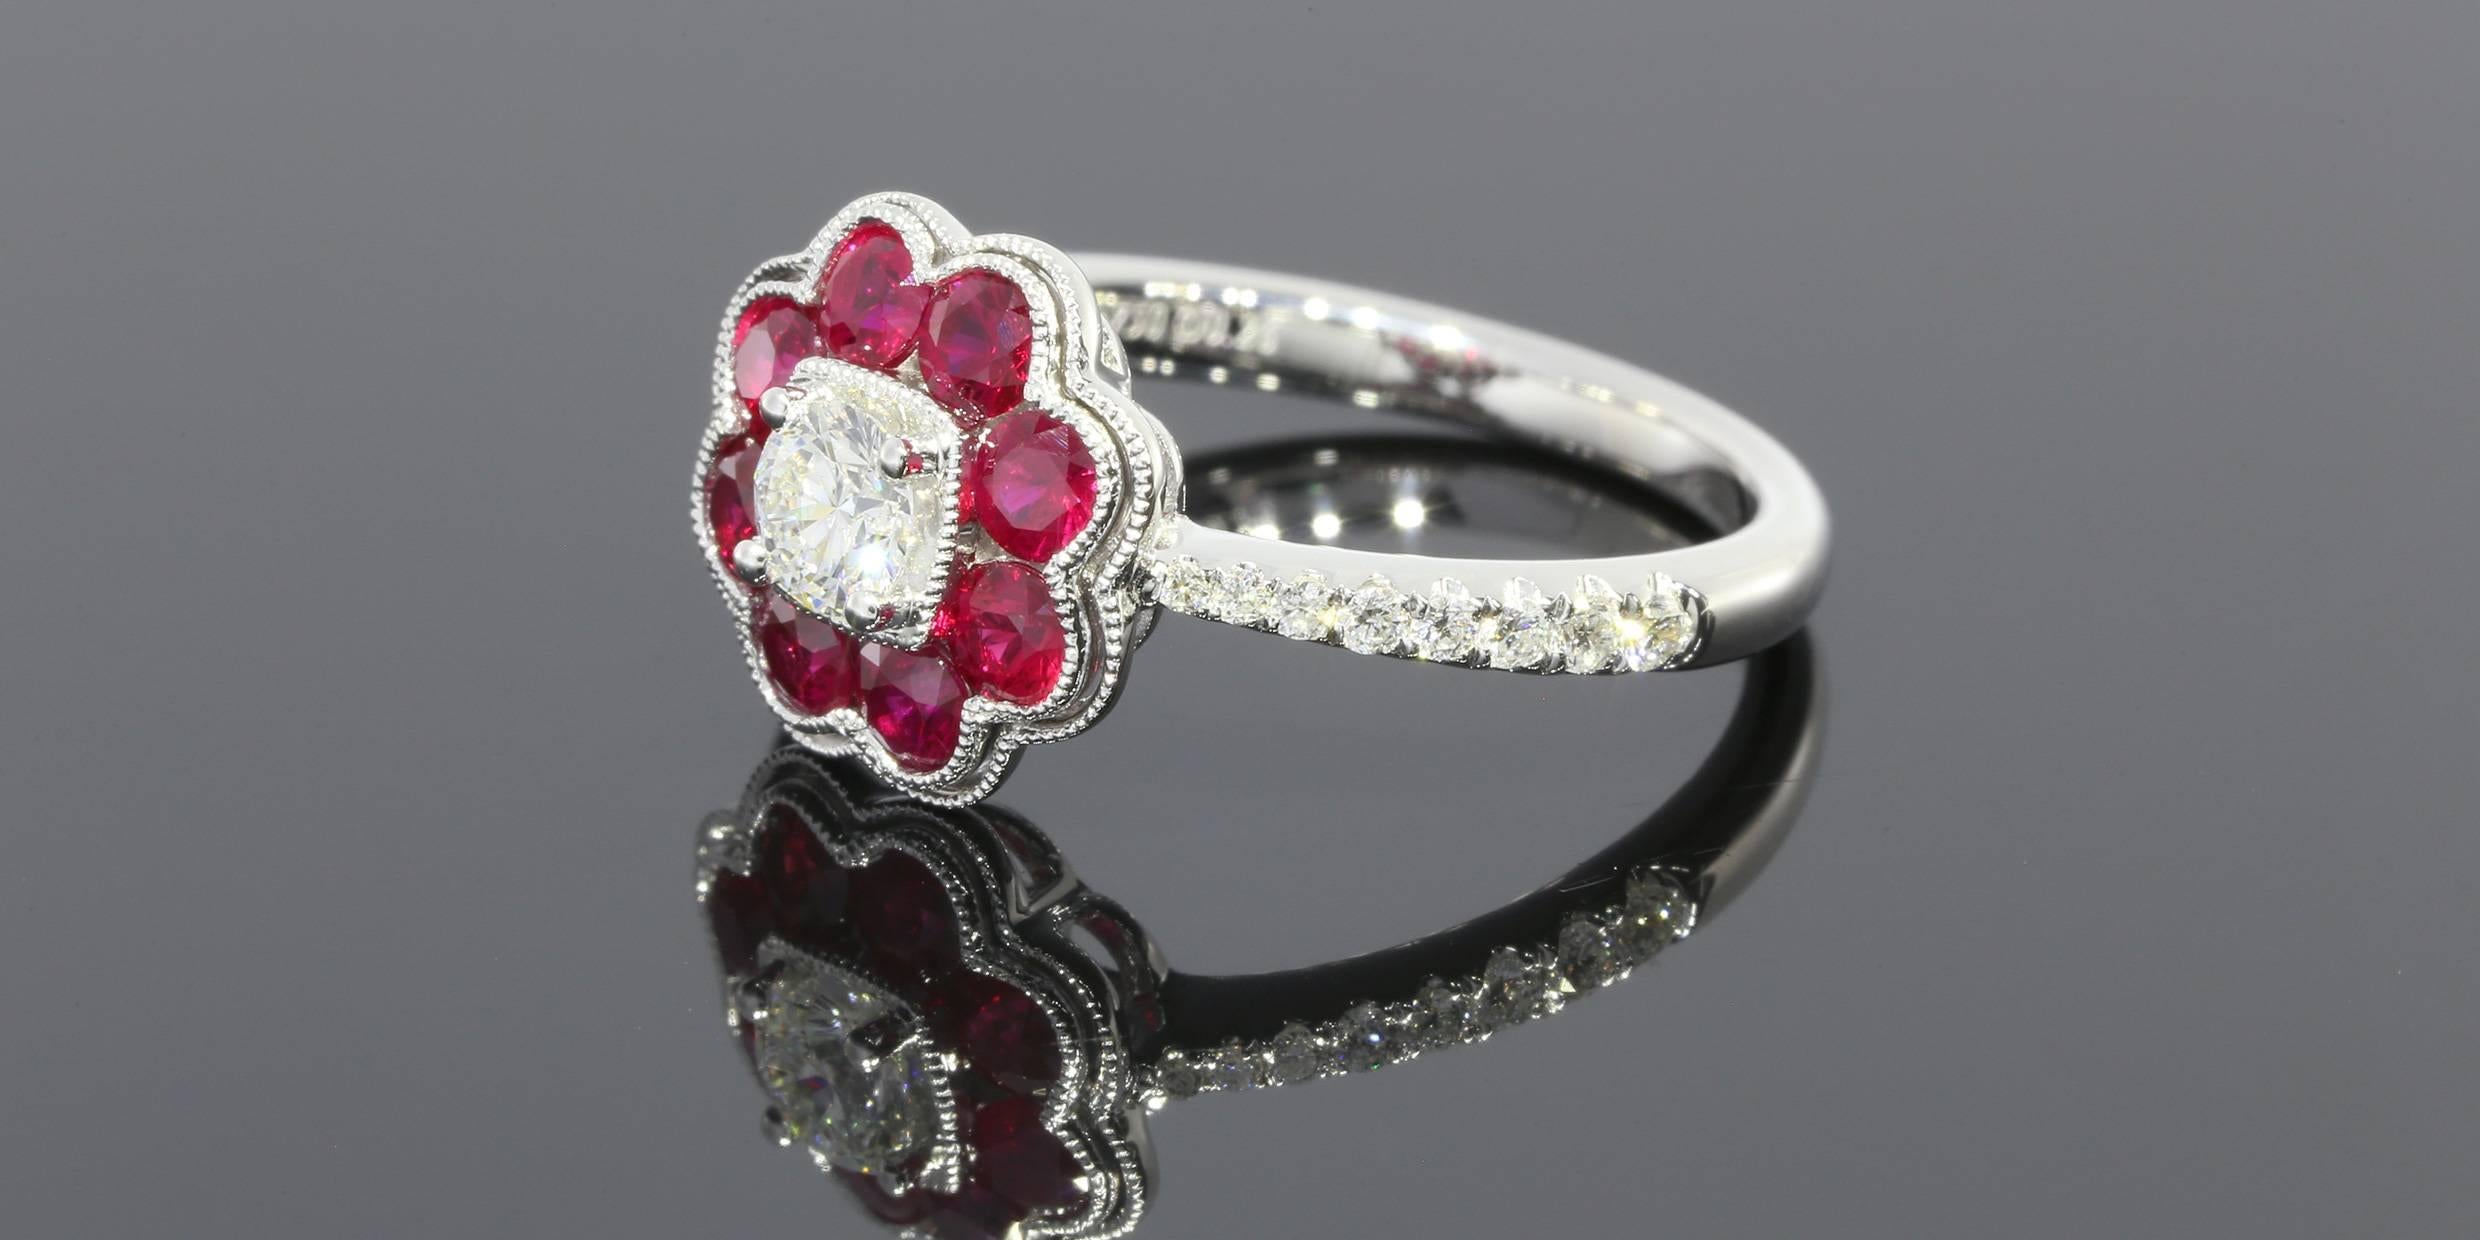 This outstanding ring features round brilliant cut white diamonds and natural rubies. The center round diamond weighs 0.26CT, 16 round accent diamonds weigh 0.21CTW and the 8 rubies weigh 0.67CTW. The total carat weight is 1.14 CTW. The ring